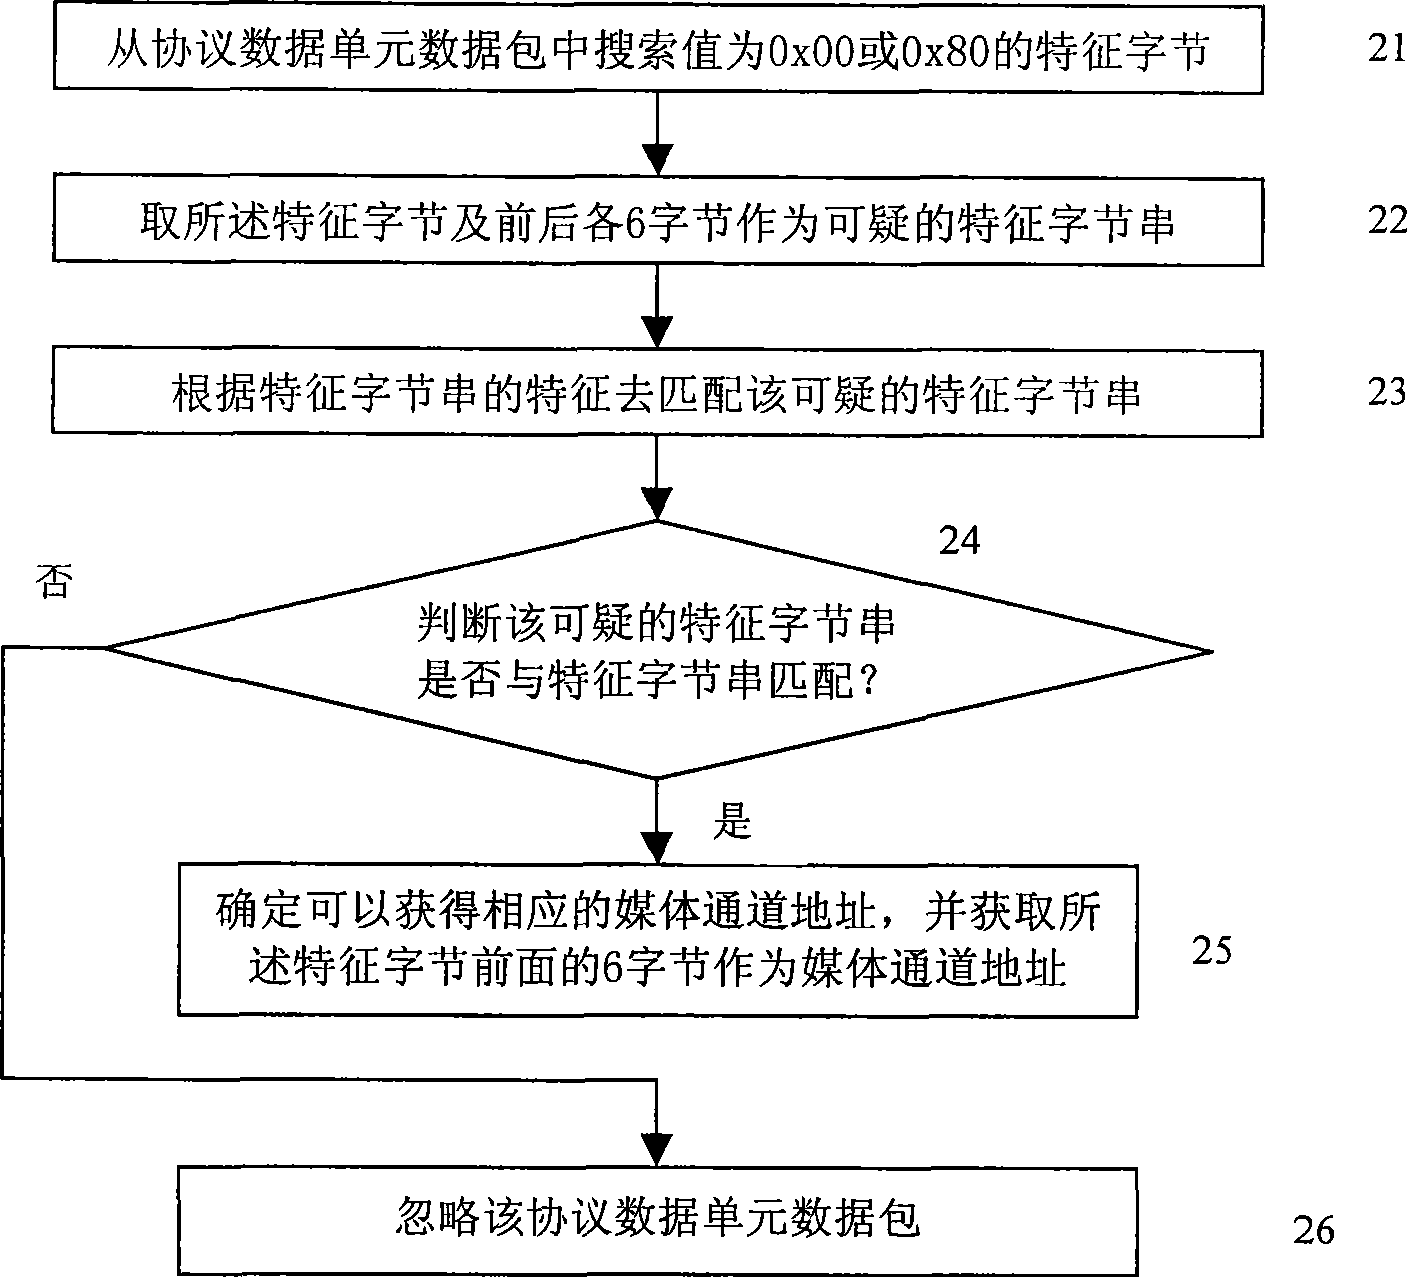 Realization method for obtaining media channel address in H.323 application process